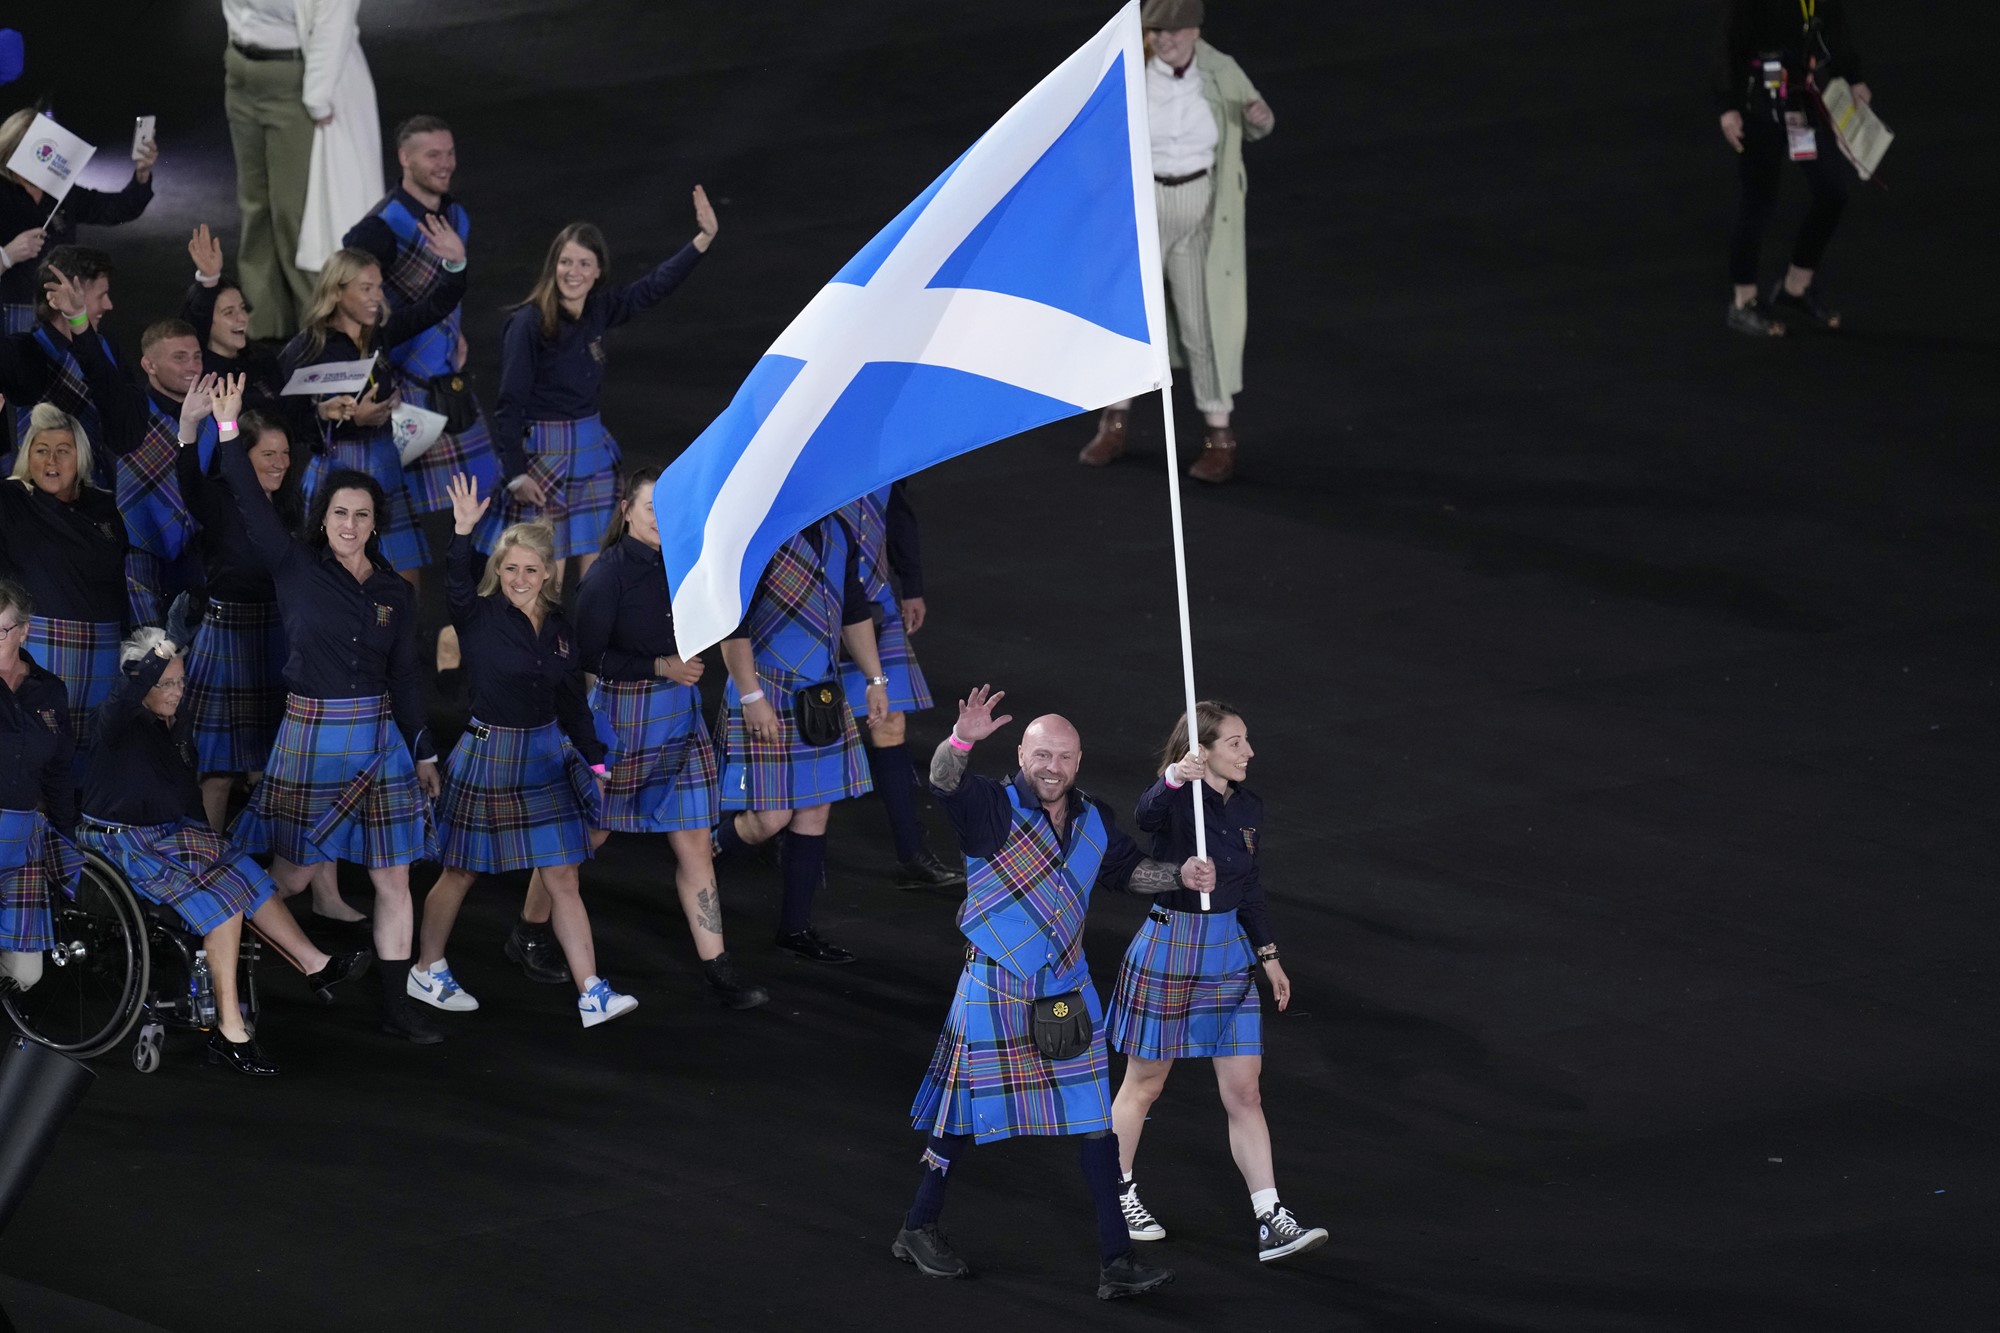 People match behind the Scotland flag